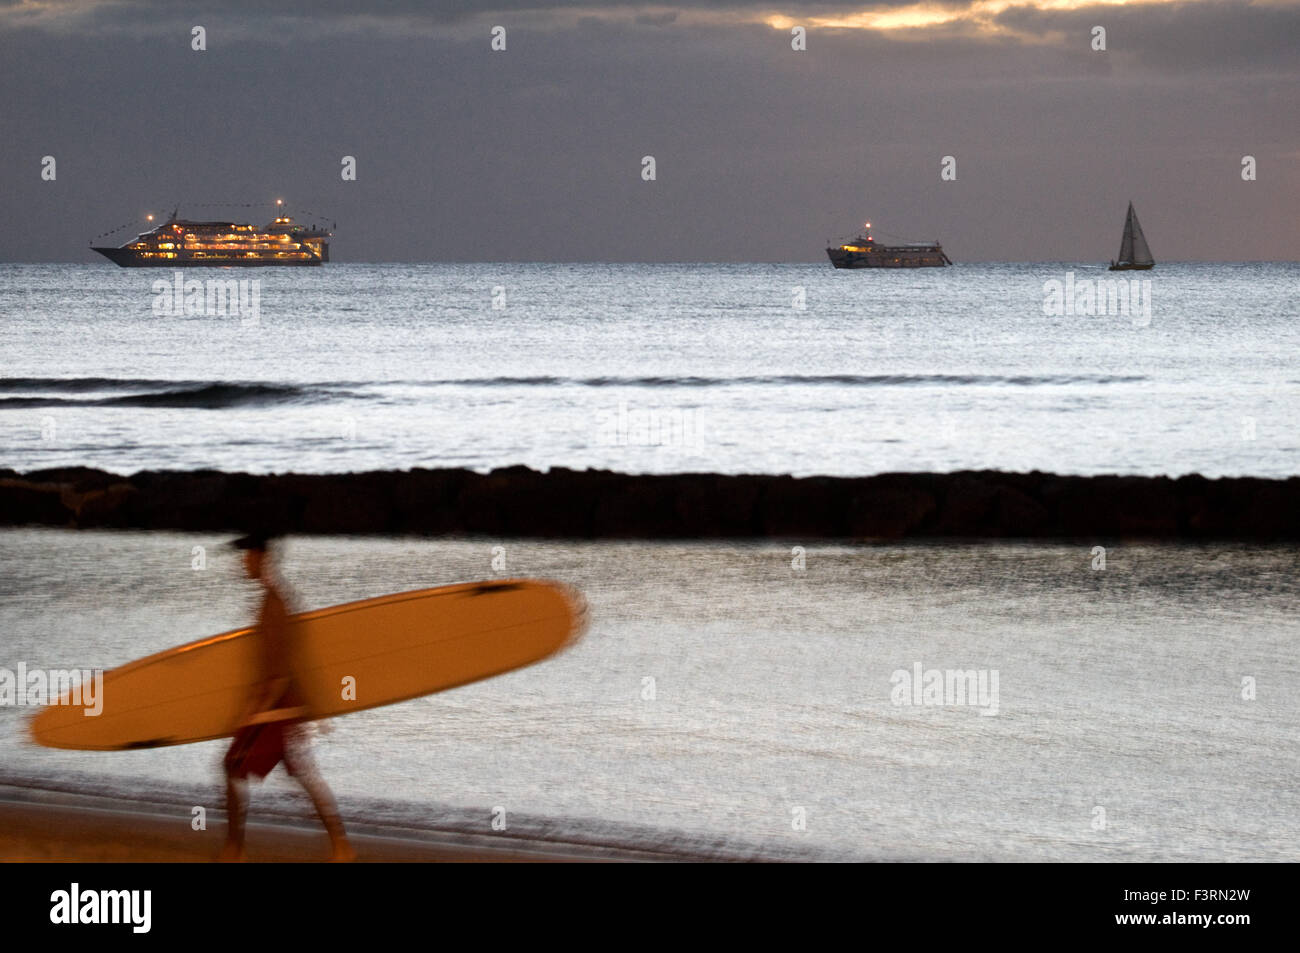 Surf and cruises, two of the most repeated words on the beaches of Waikiki Beach. O'ahu. Hawaii. Surfer on the famous Waikiki Be Stock Photo